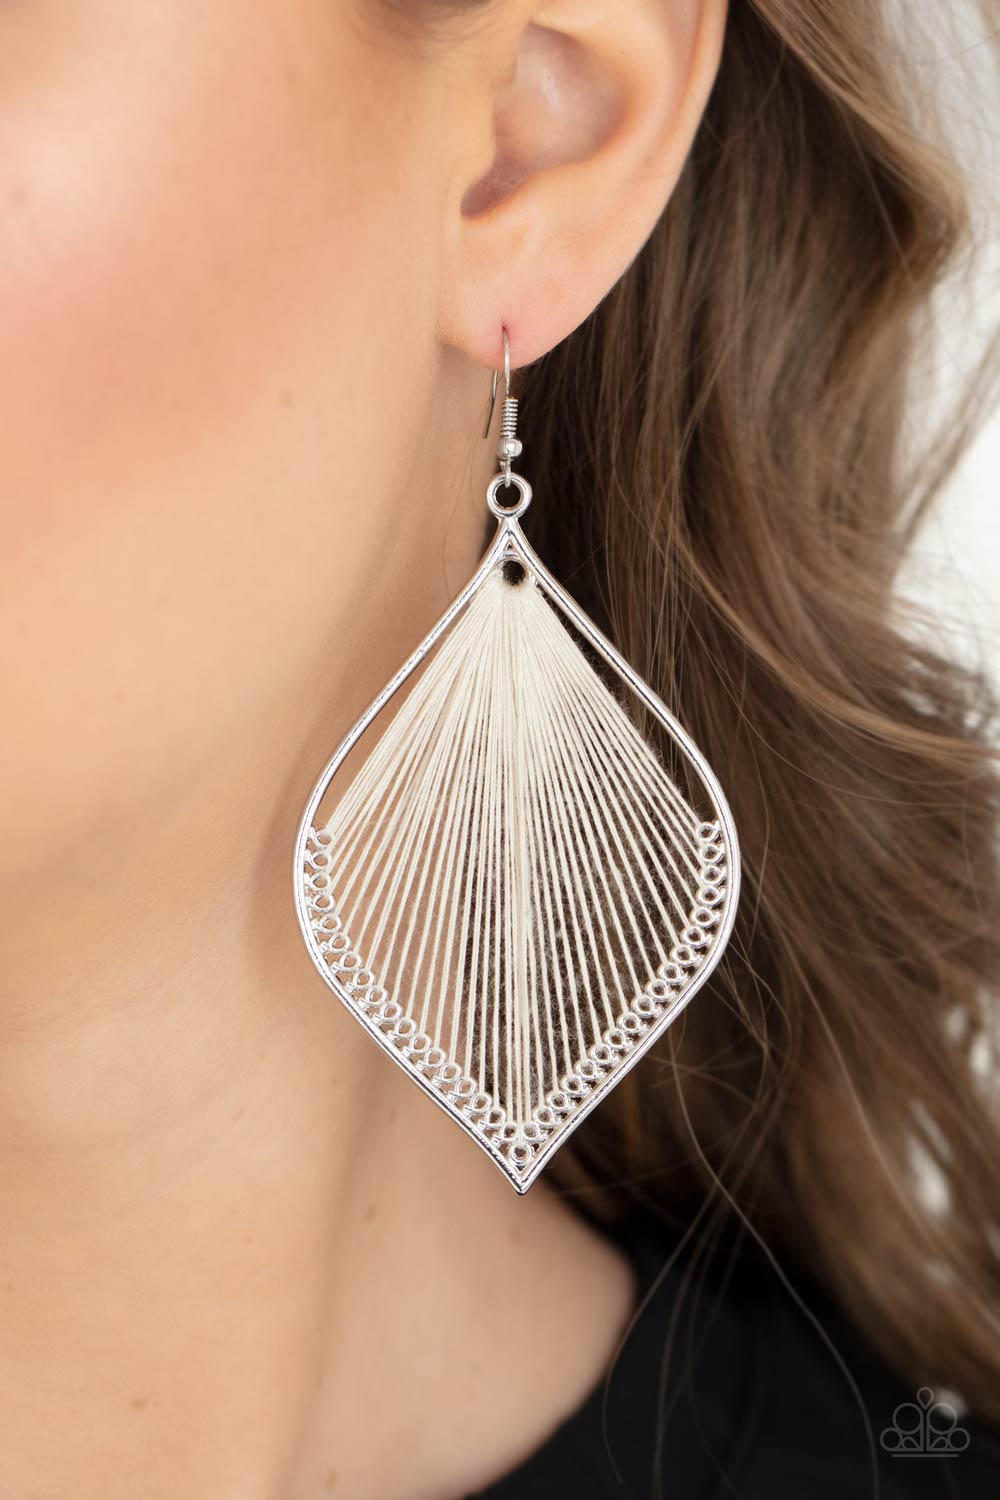 String Theory White Earring - Paparazzi Accessories  White string is threaded through small hoops inside a silver mandala-shaped frame for a vibrant artistic adornment. Earring attaches to a standard fishhook fitting.  All Paparazzi Accessories are lead free and nickel free!  Sold as one pair of earrings.